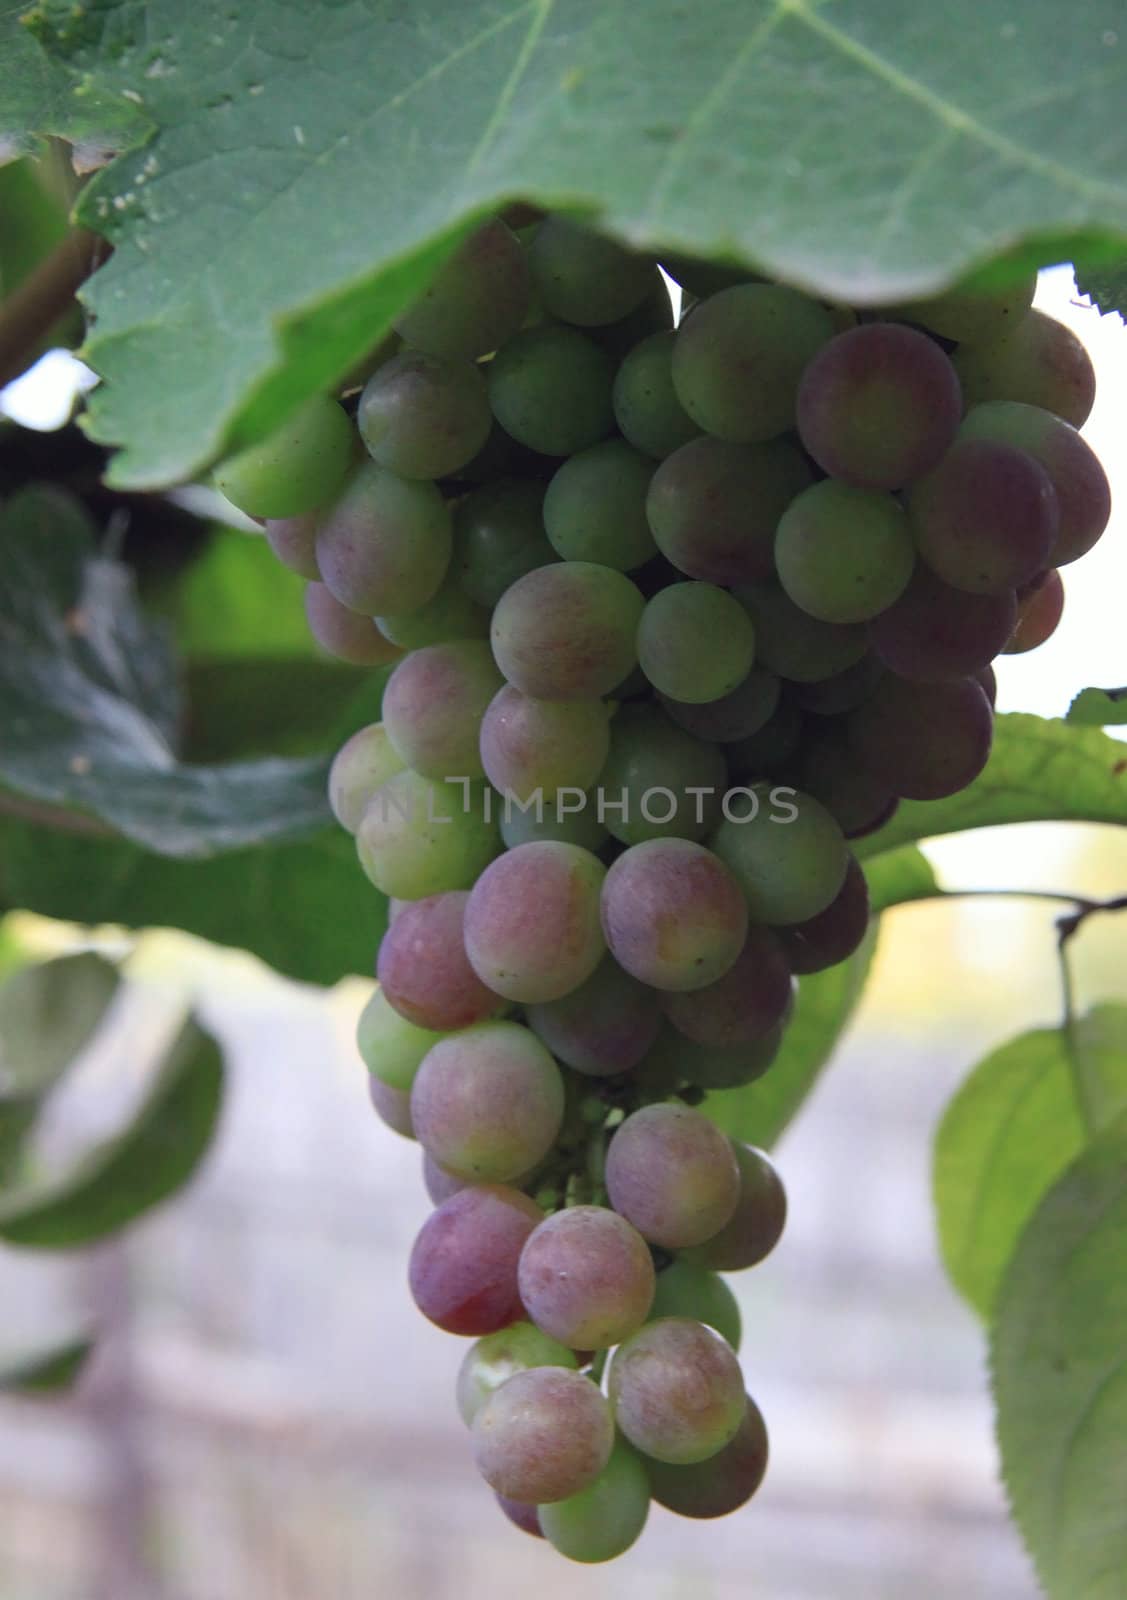 Bunch of grapes in the garden by tabis